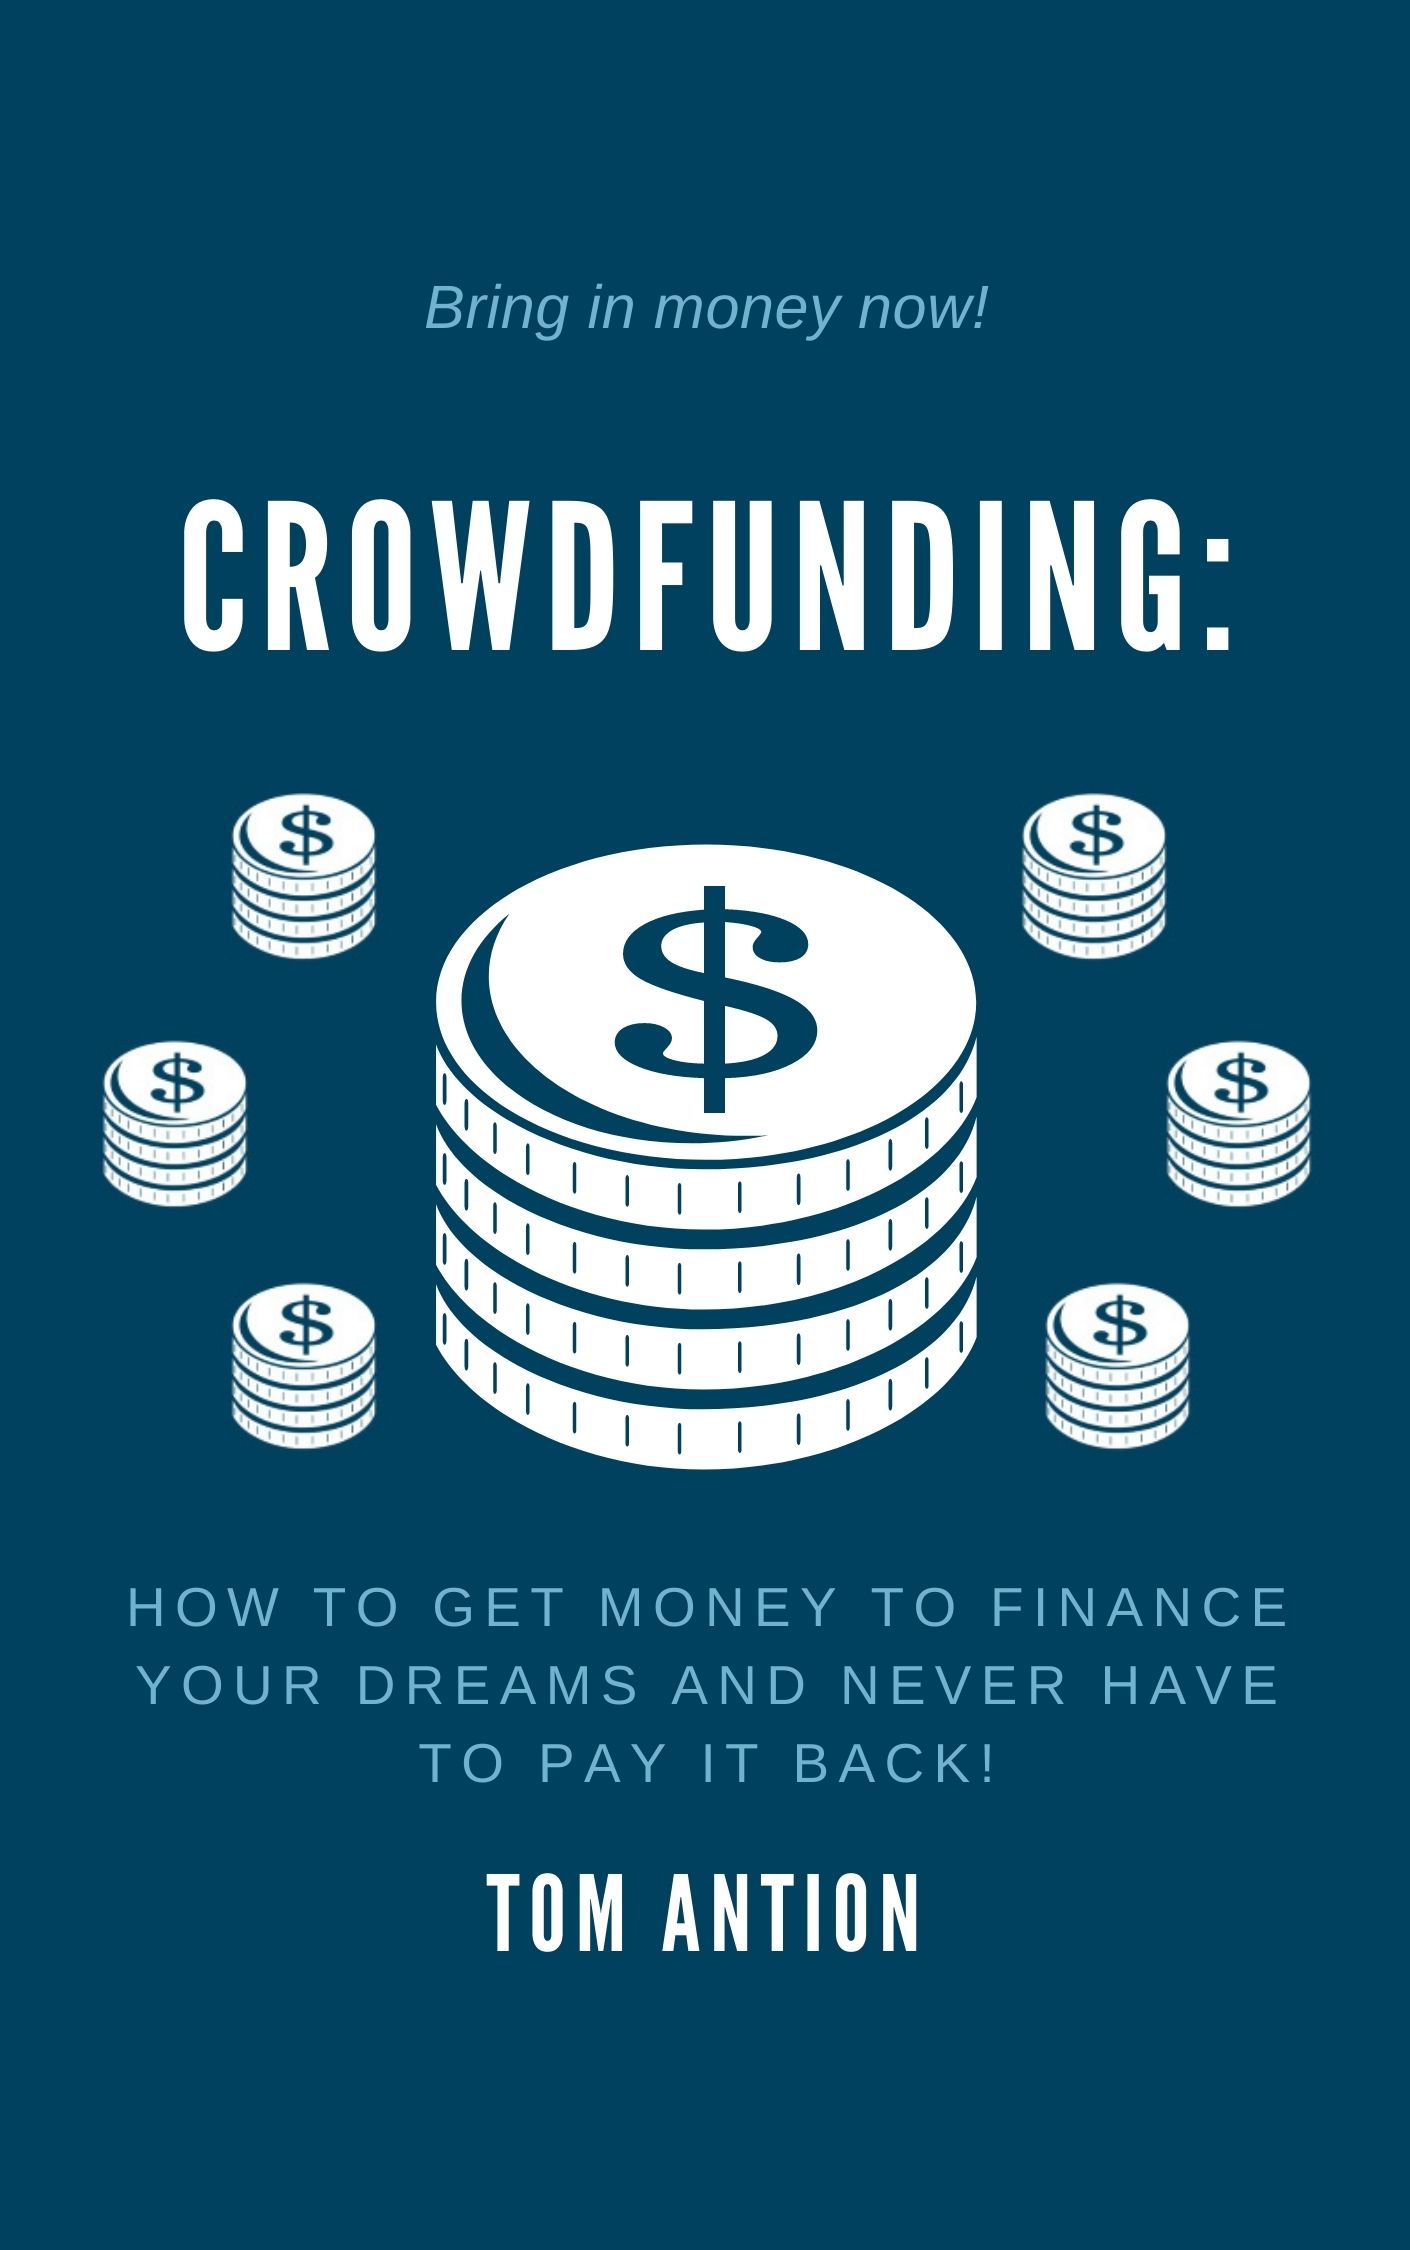 CrowdFunding: How to Get the Money to Finance Your Dreams and Never Have to Pay it Back